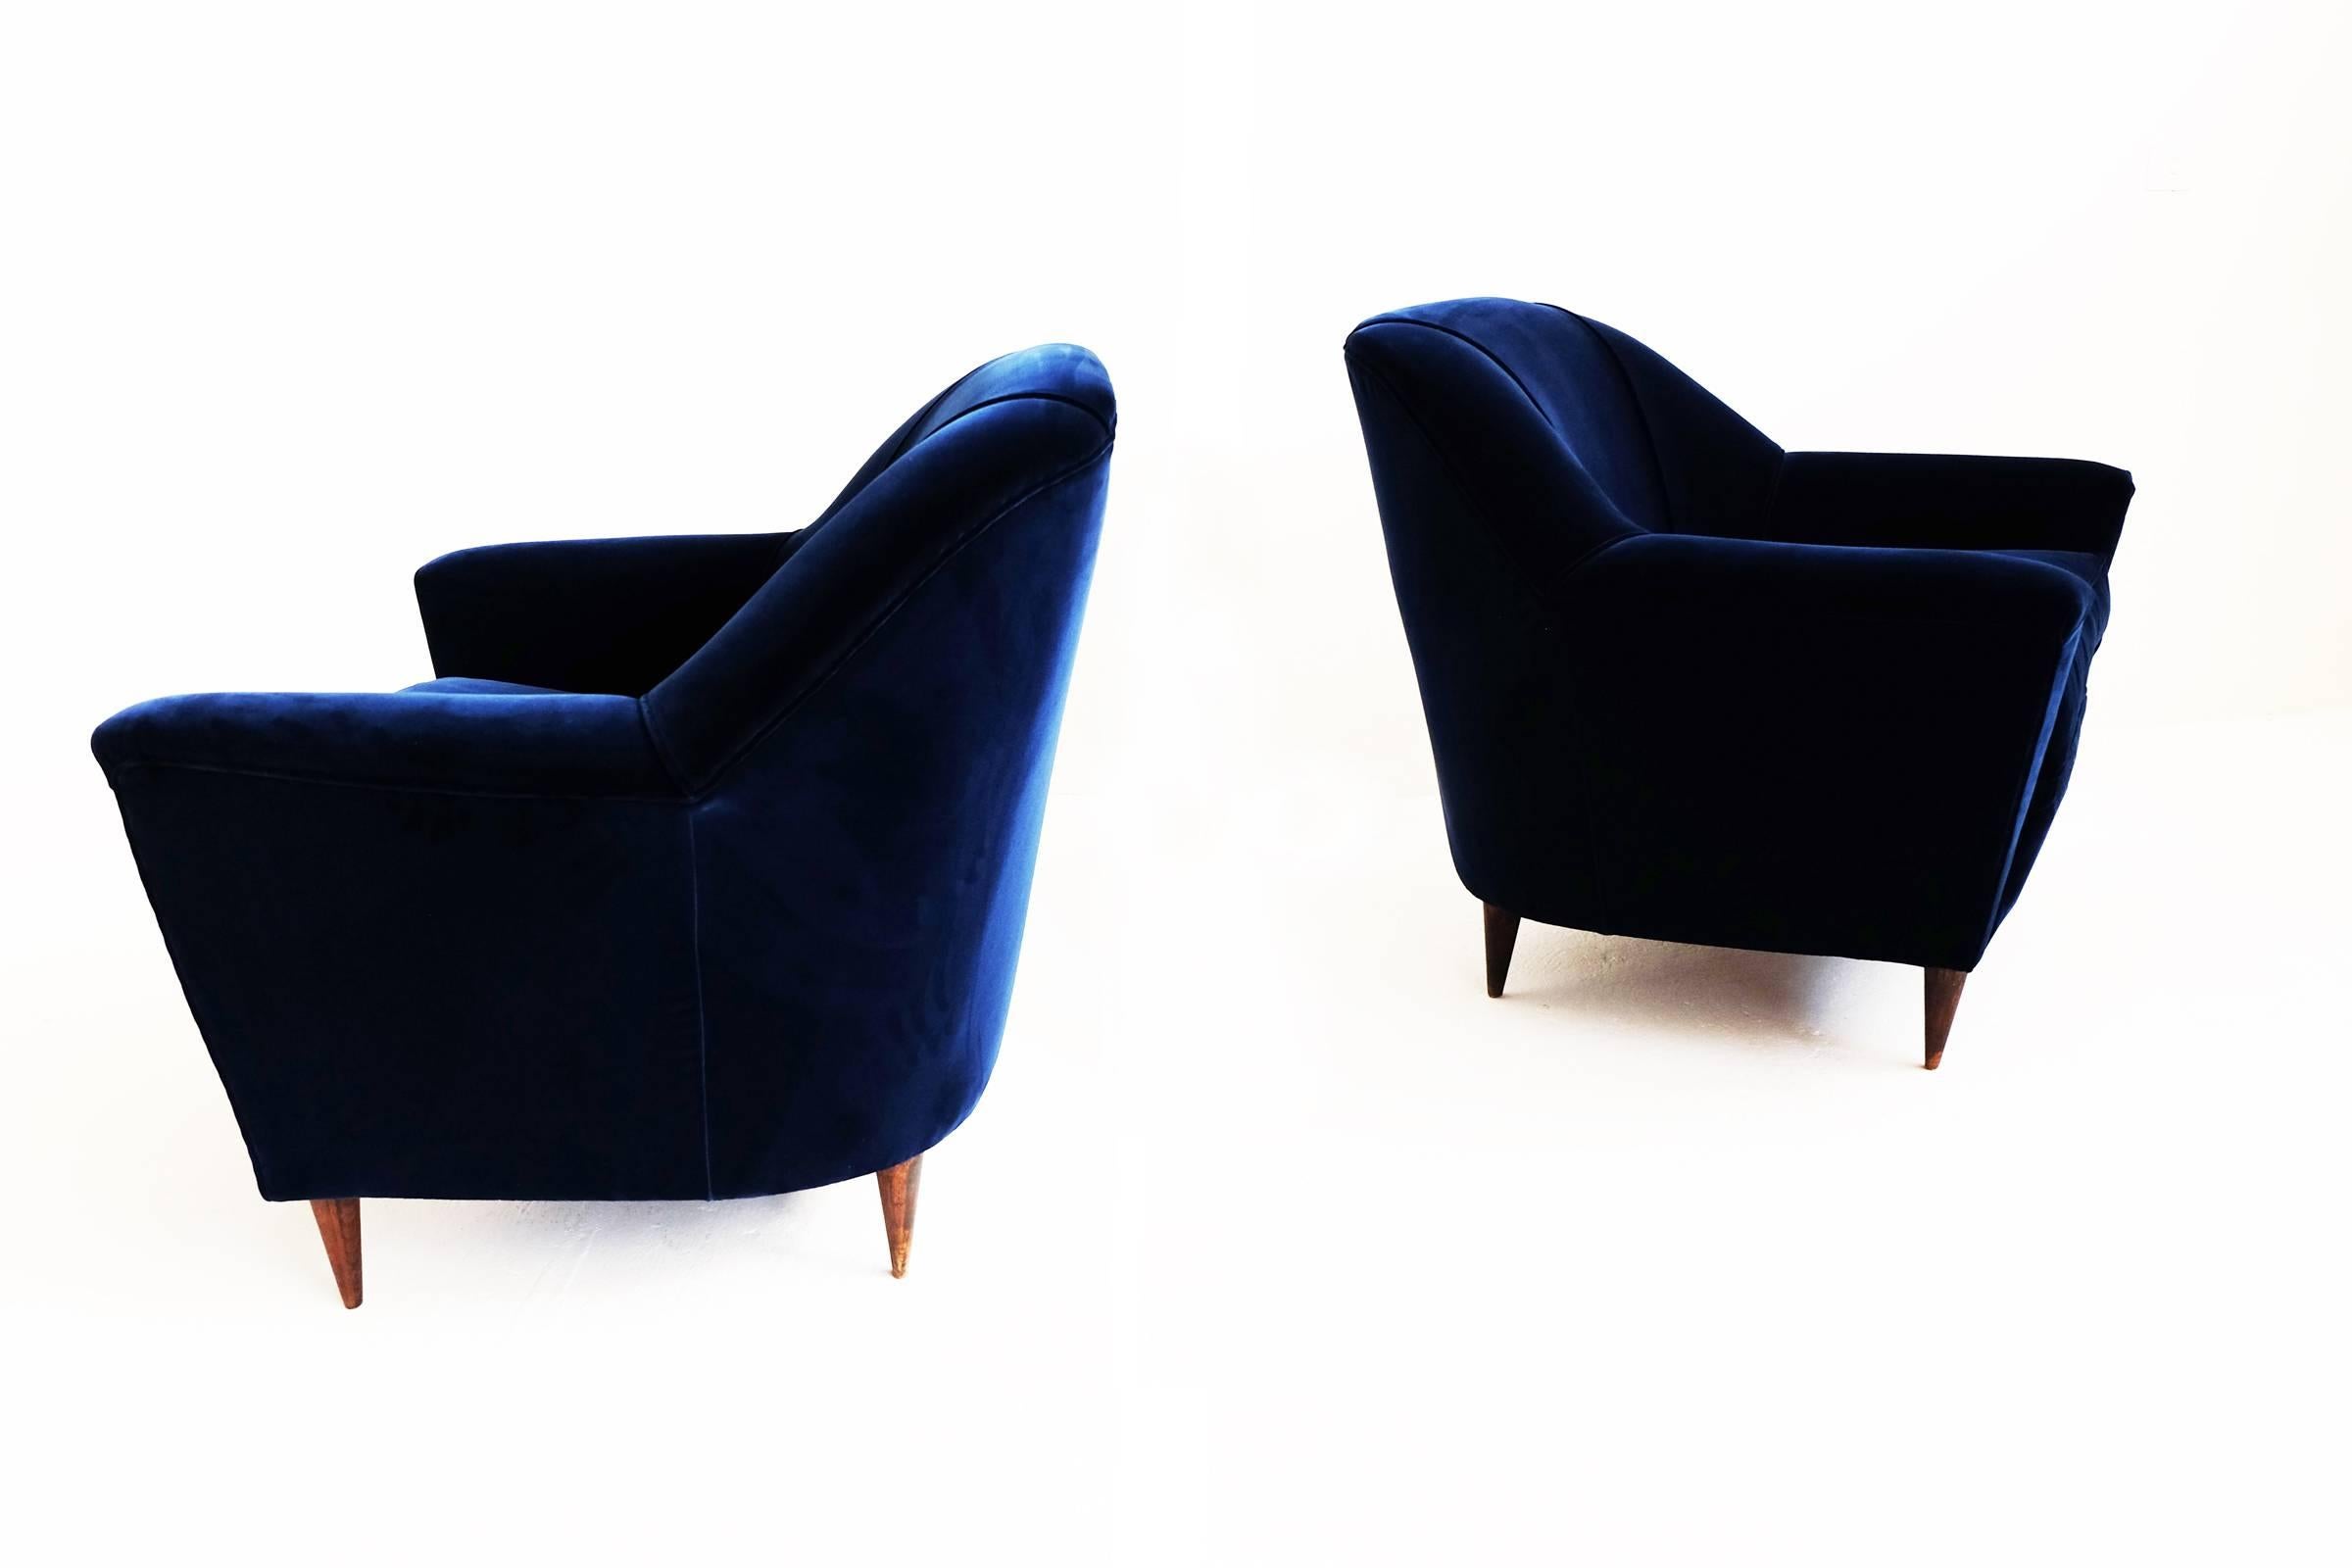 Designed by Ico Parisi and produced by Ariberto Colombo, Italy, circa 1950
Totally new upholstery in first class deep blue velvet, feather pillows and wood.
 